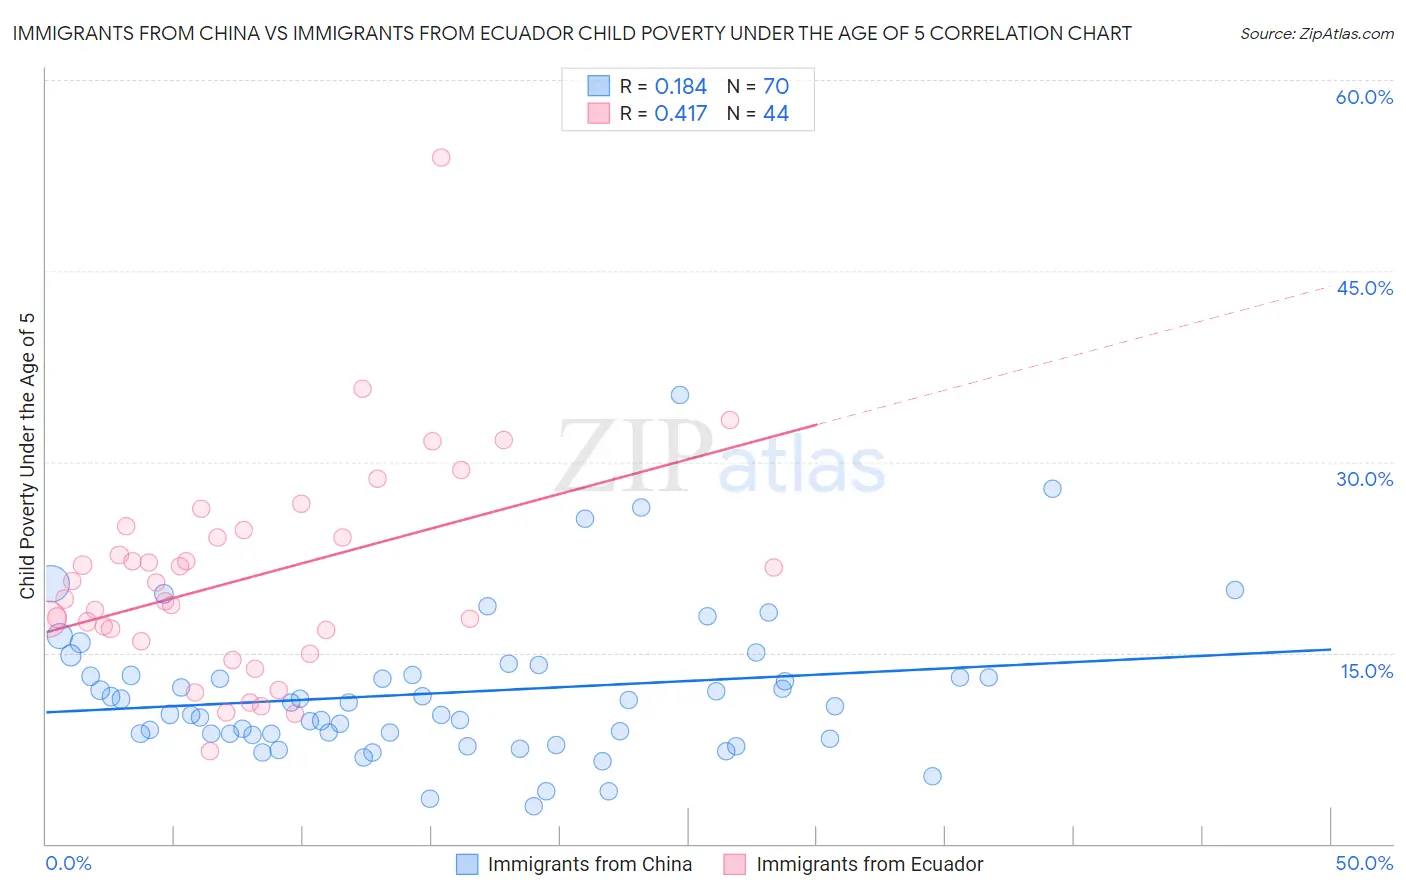 Immigrants from China vs Immigrants from Ecuador Child Poverty Under the Age of 5